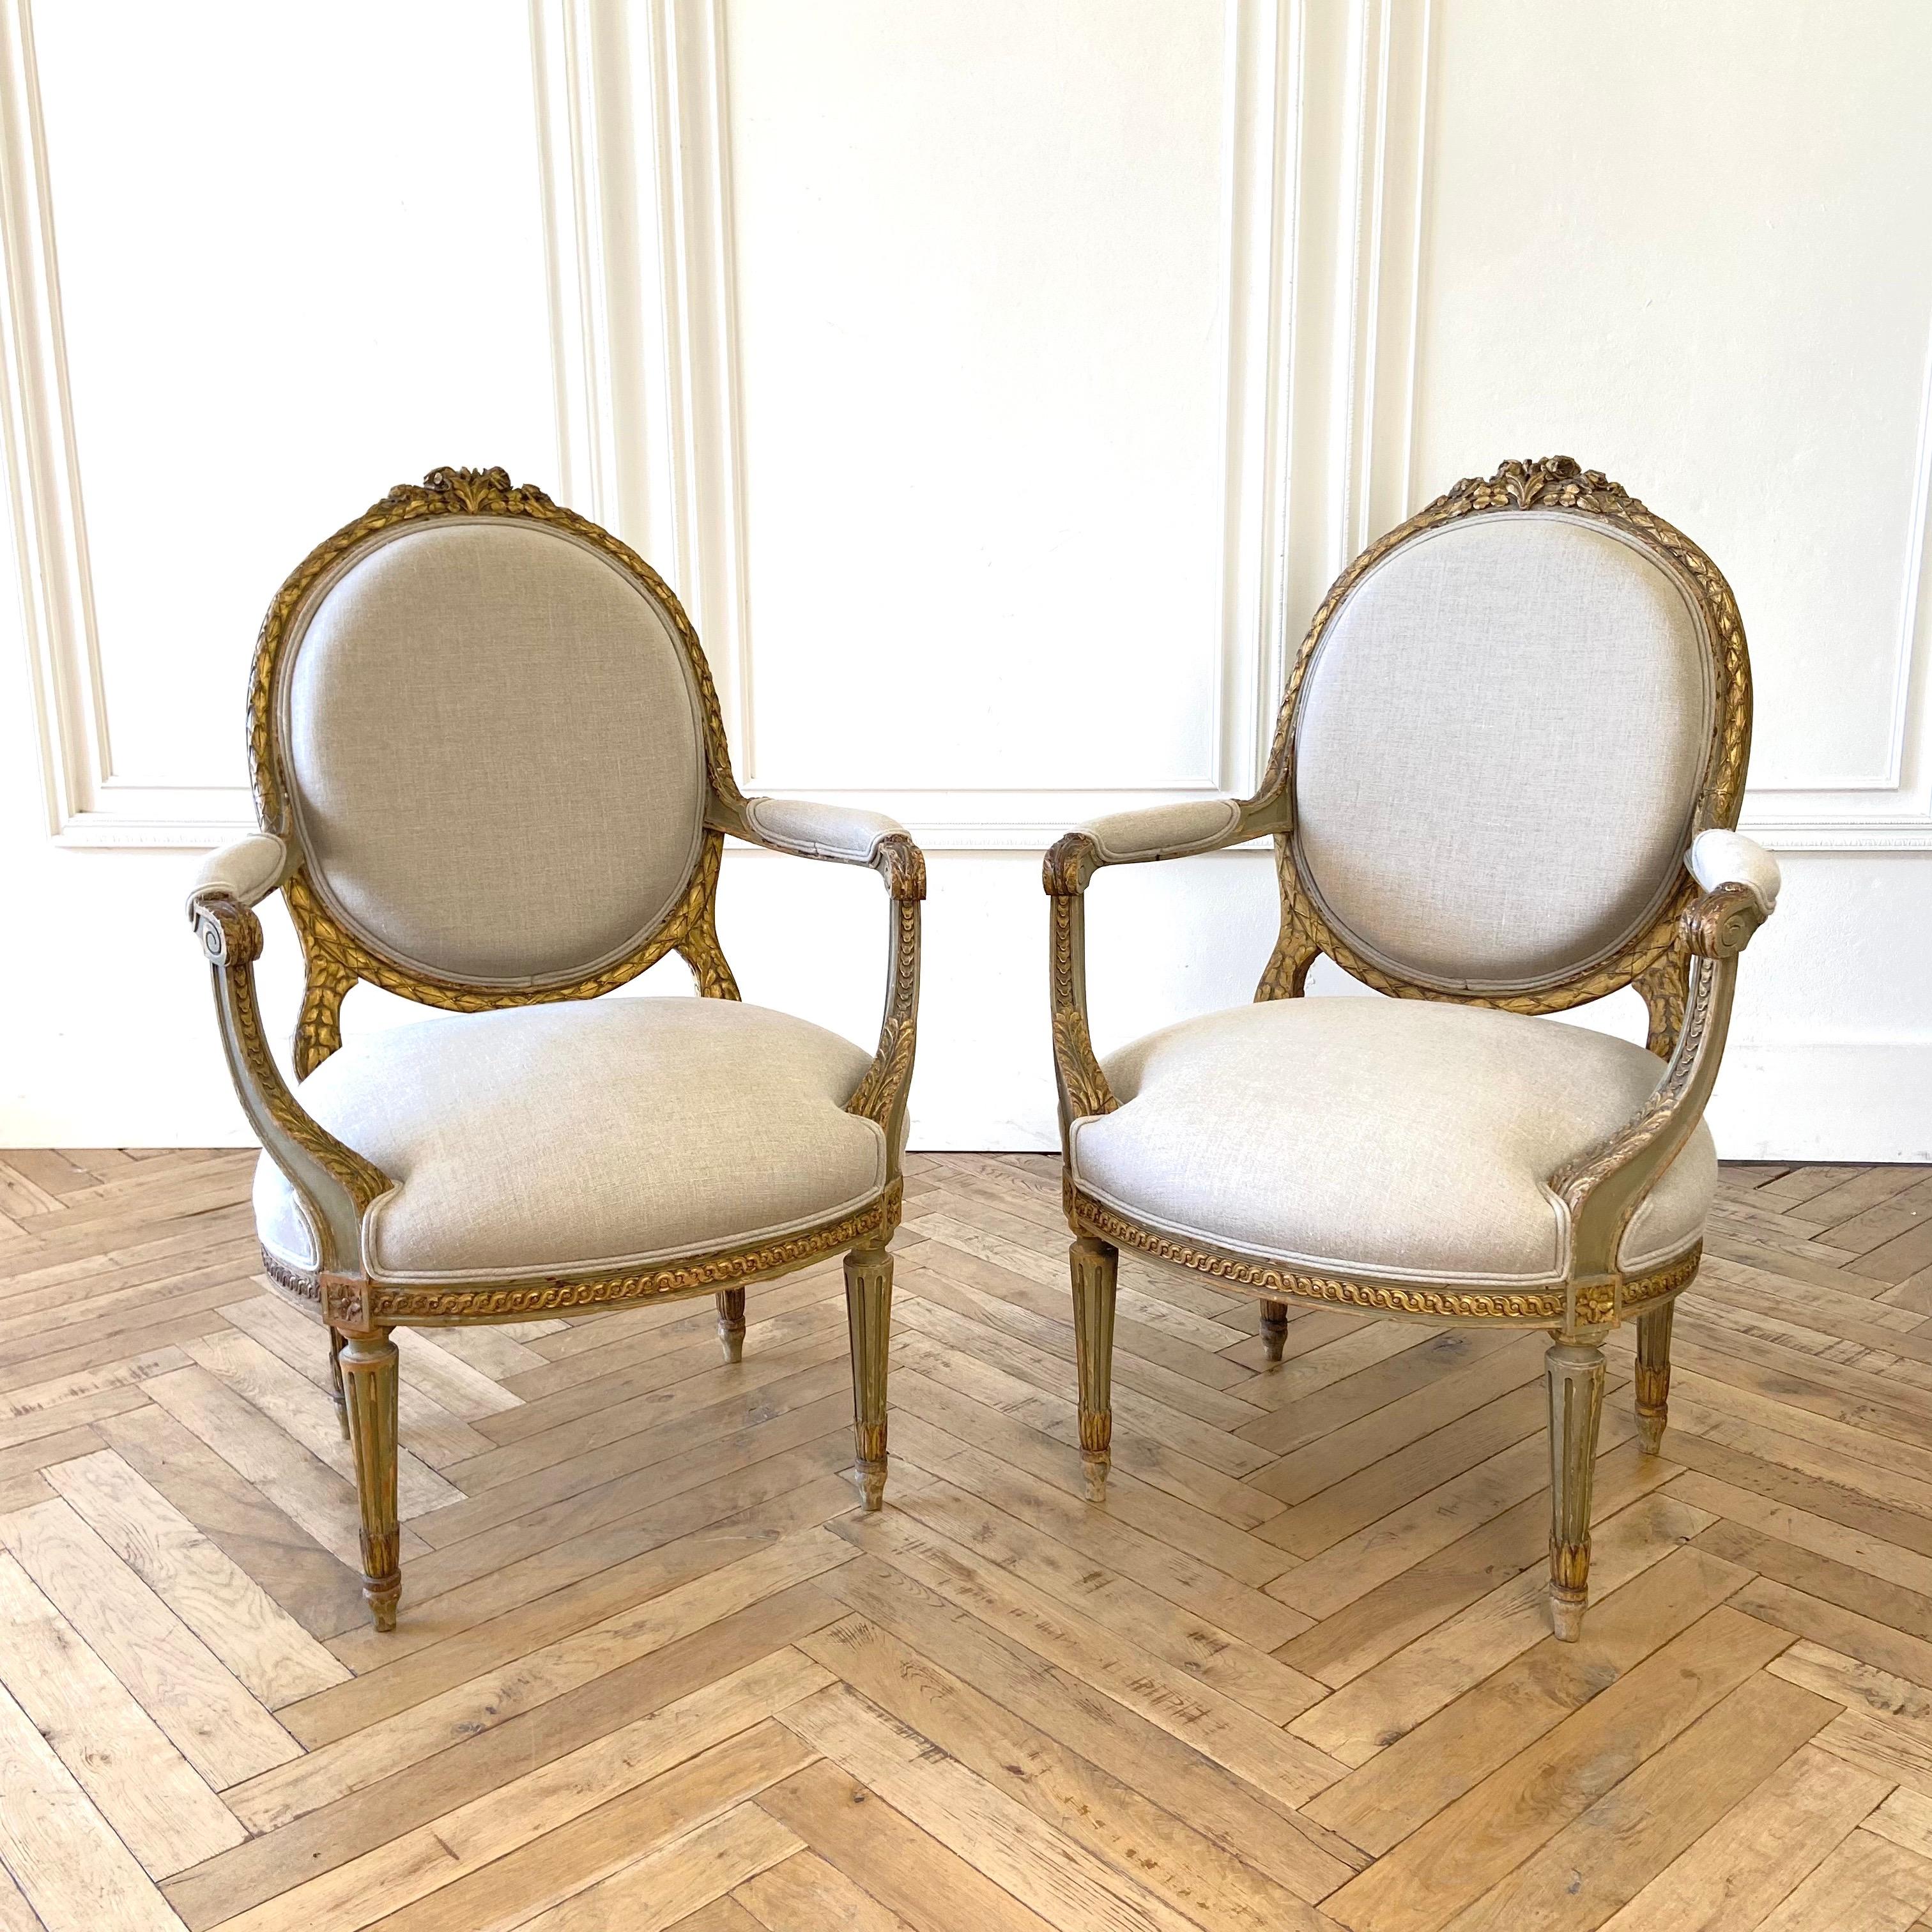 Antique Pair of French Louis XVI Style Arm Chairs Original Paint and Giltwood For Sale 6